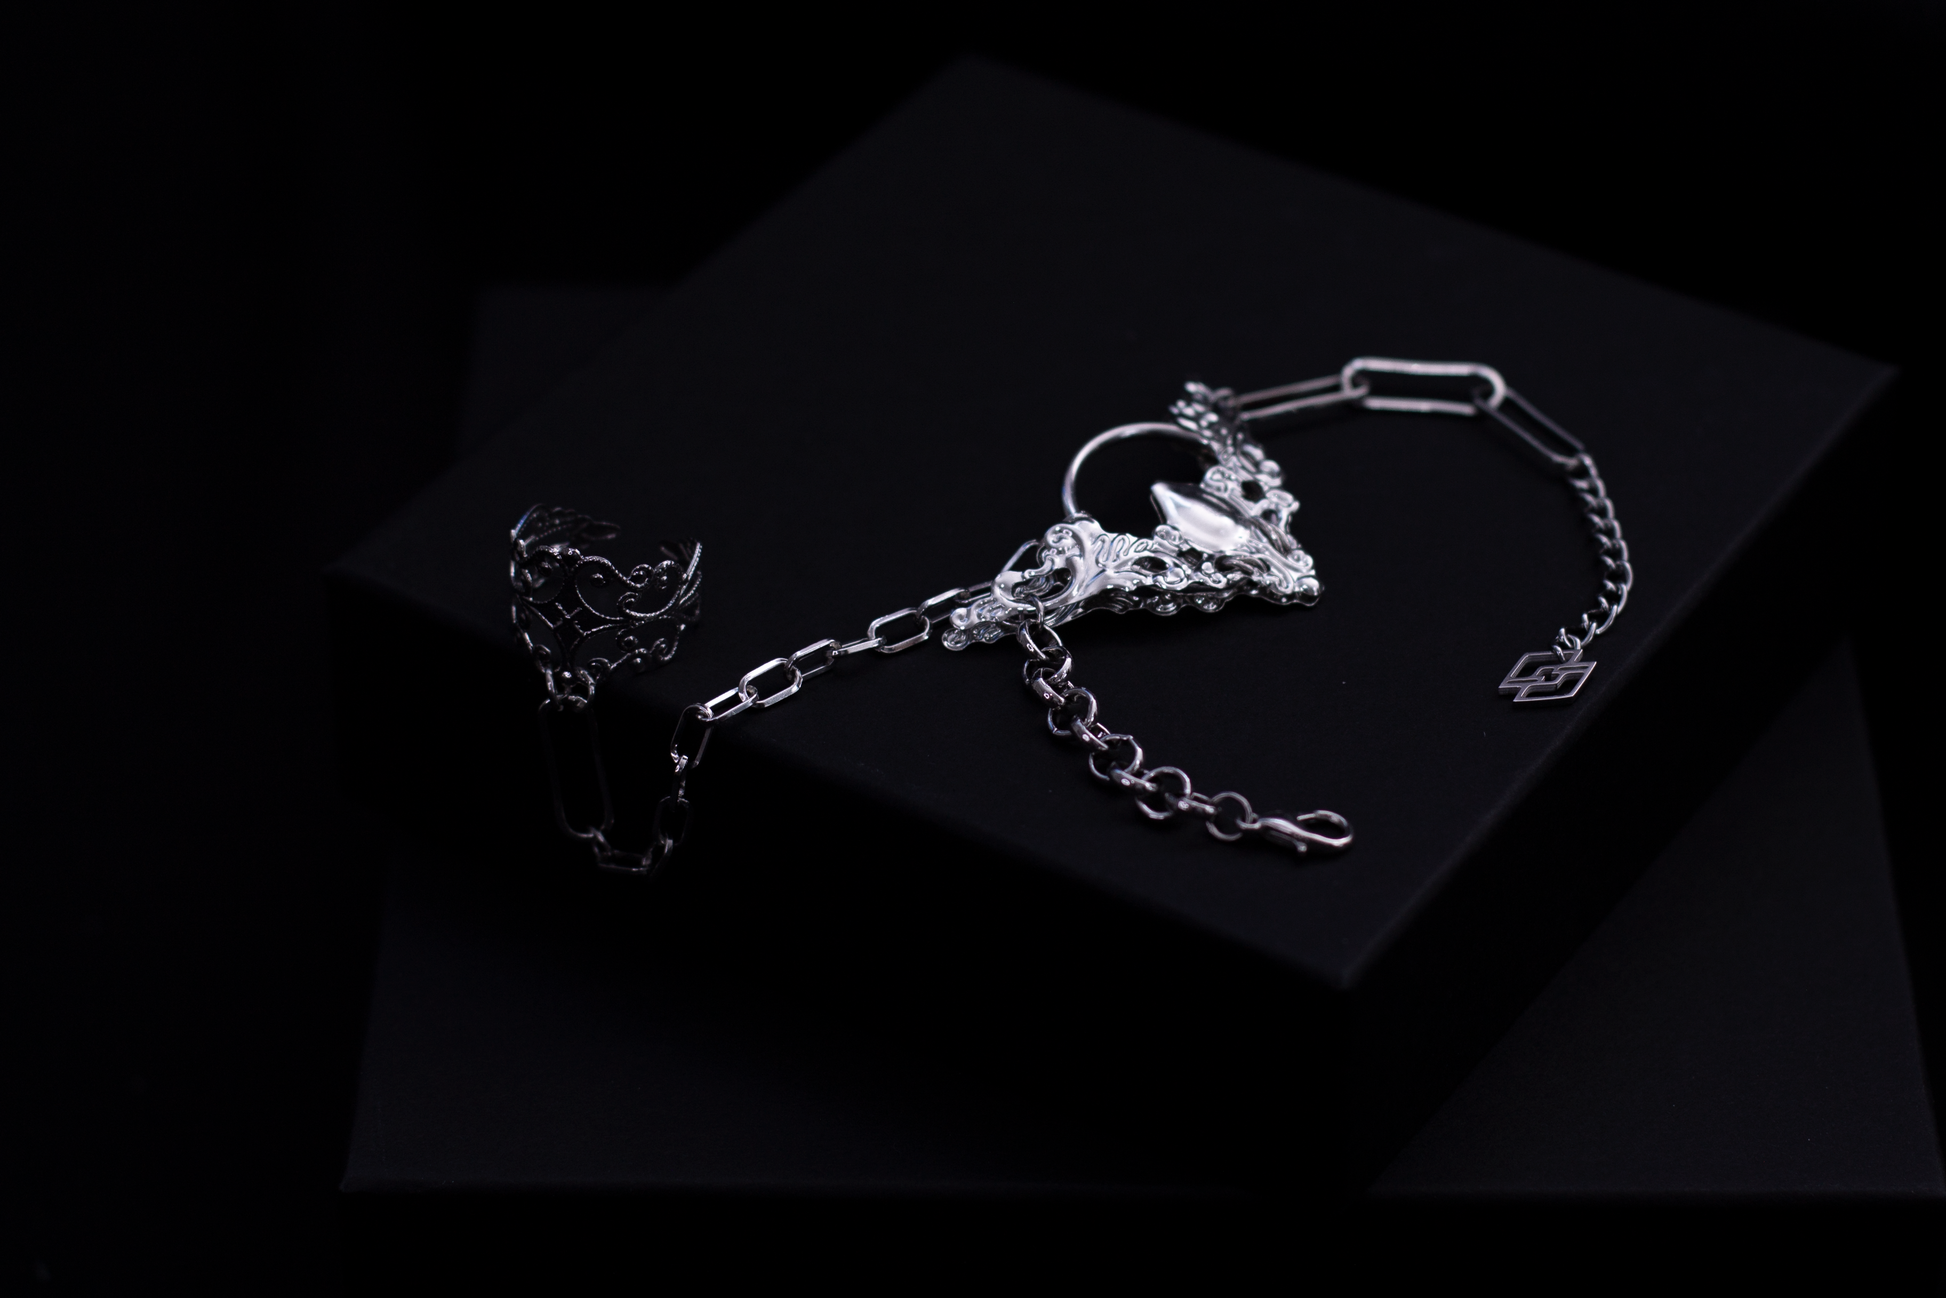 Myril Jewels presents a hand chain bracelet ring, set against a black background, that combines neo-gothic intricacy with punk accents, perfect for avant-garde jewelry aficionados